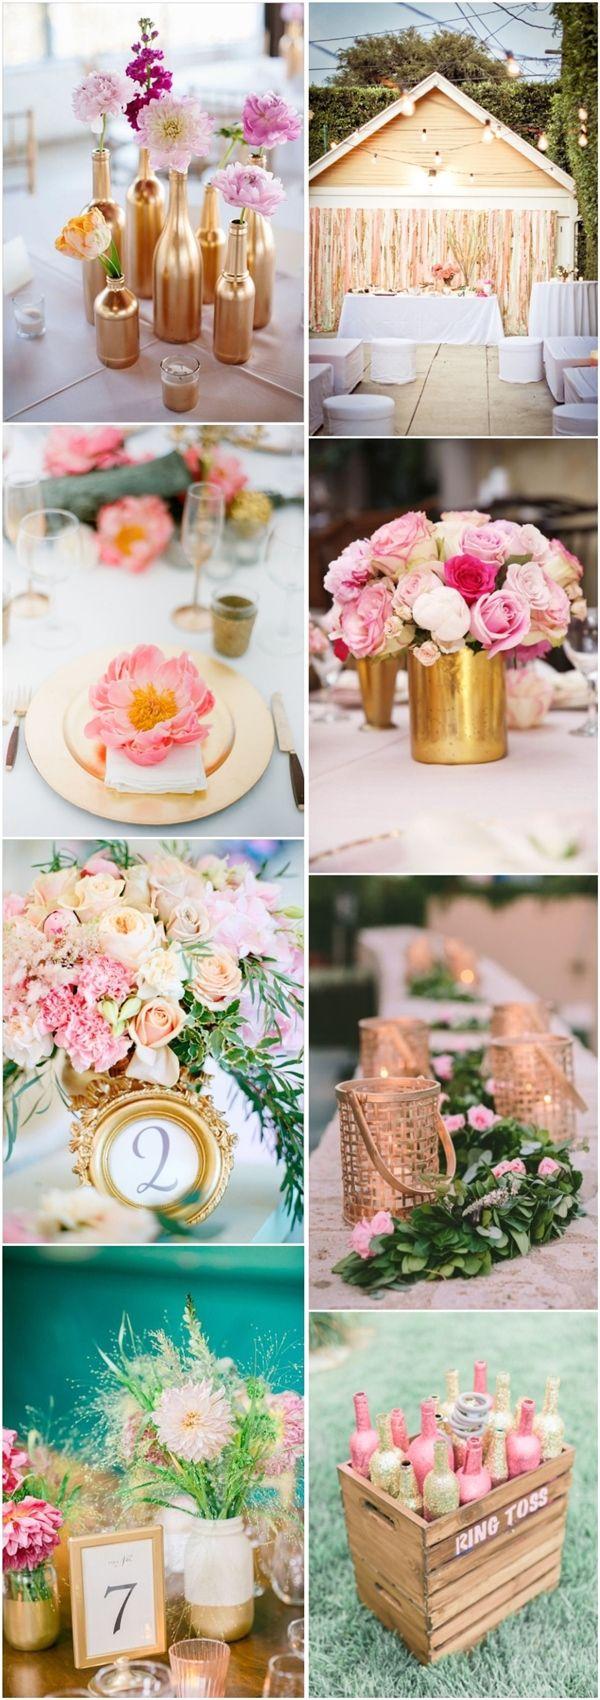 Wedding - 40 Romantic Pink And Gold Wedding Color Scheme Ideas